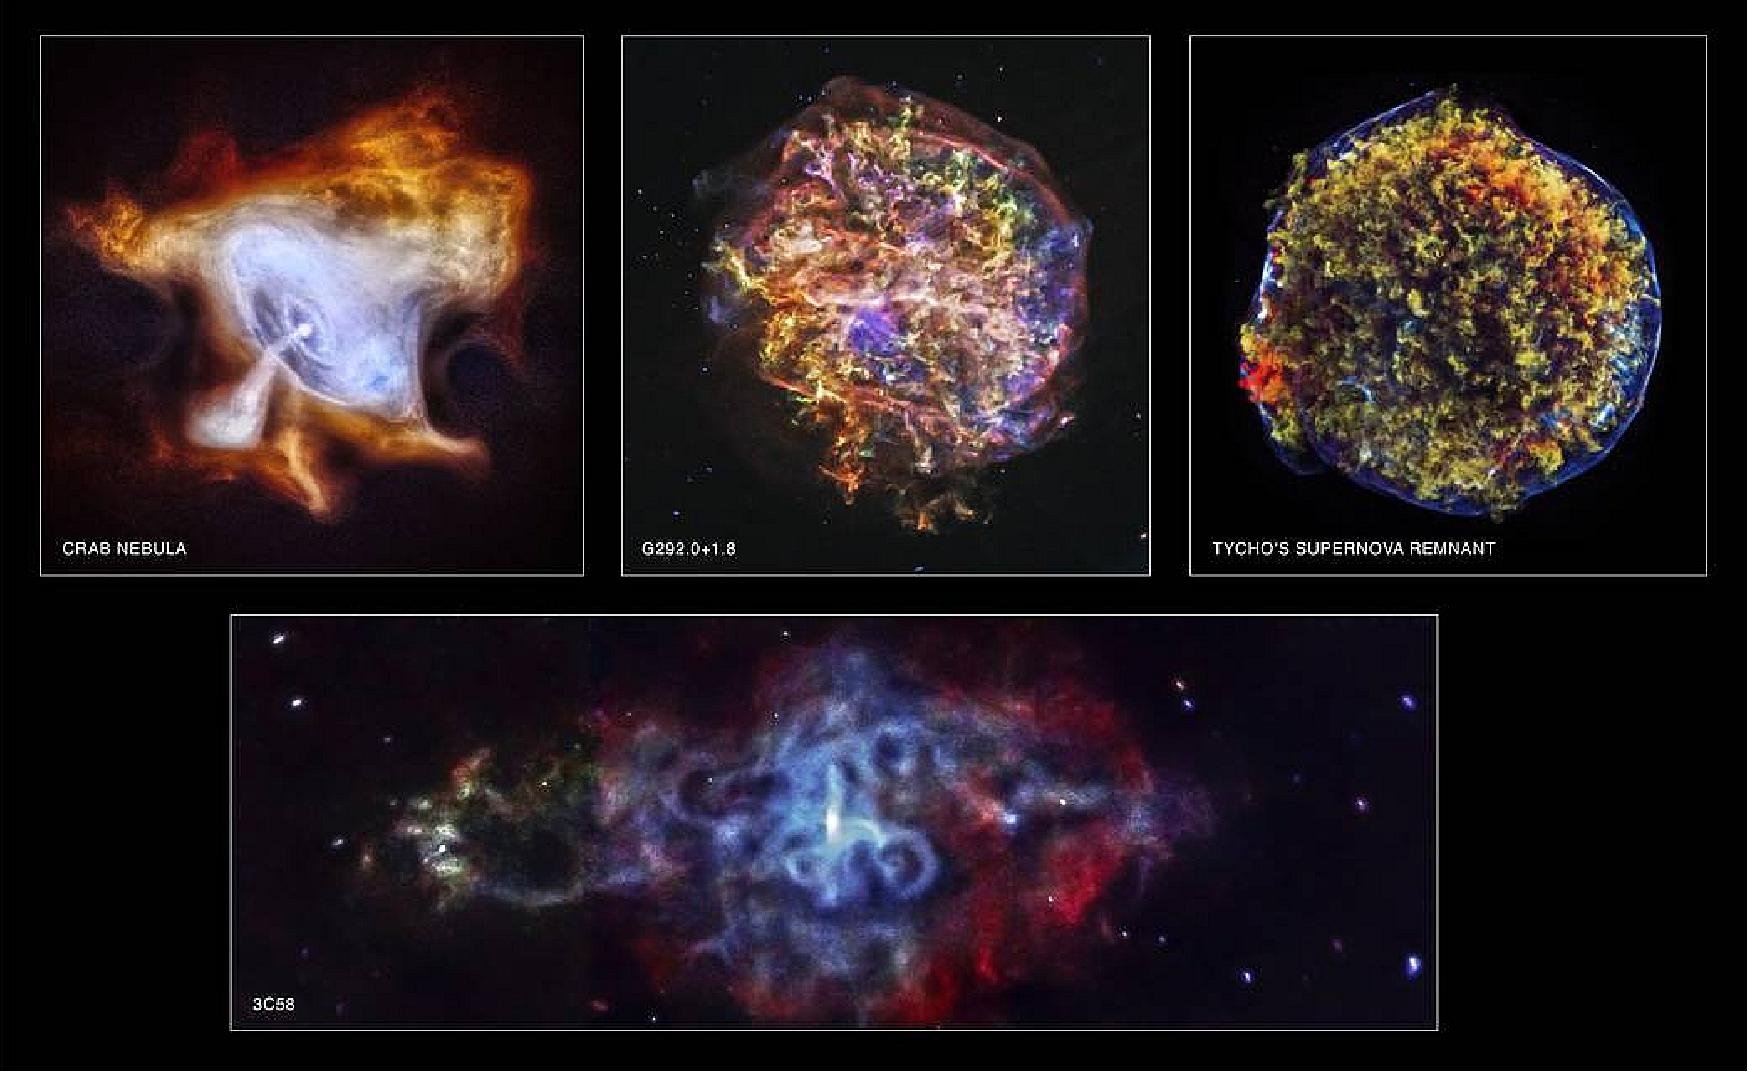 Figure 51: The images of the Tycho and G292.0+1.8 supernova remnants show how Chandra can trace the expanding debris of an exploded star and the associated shock waves that rumble through interstellar space at speeds of millions of miles per hour. The images of the Crab Nebula and 3C 58 show how extremely dense, rapidly rotating neutron stars produced when a massive star explodes can create clouds of high-energy particles light years across that glow brightly in X-rays (image credit: NASA/CXC/SAO)